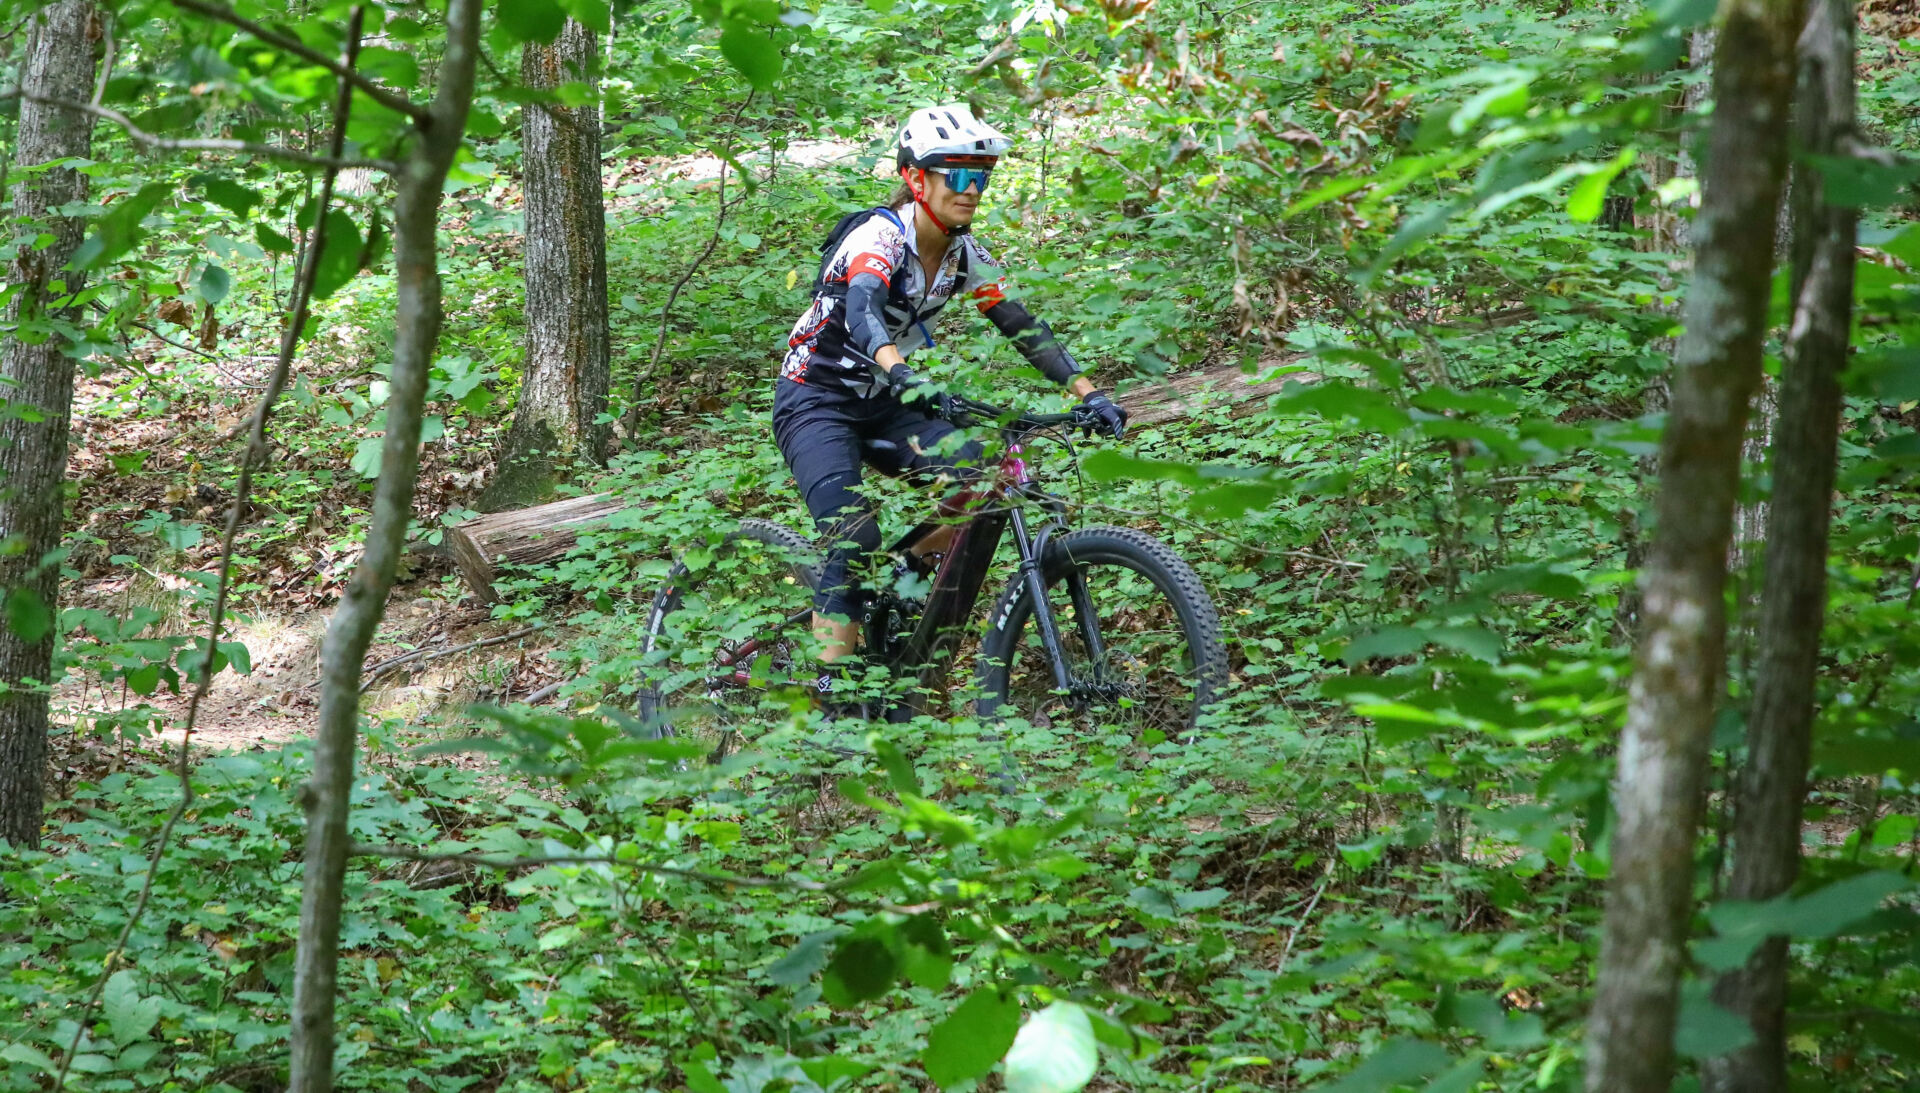 Anne Roberts in action on a Liv Intrigue X E+ 1 electric mountain bike somewhere in Georgia. Photo by Lee Fields.